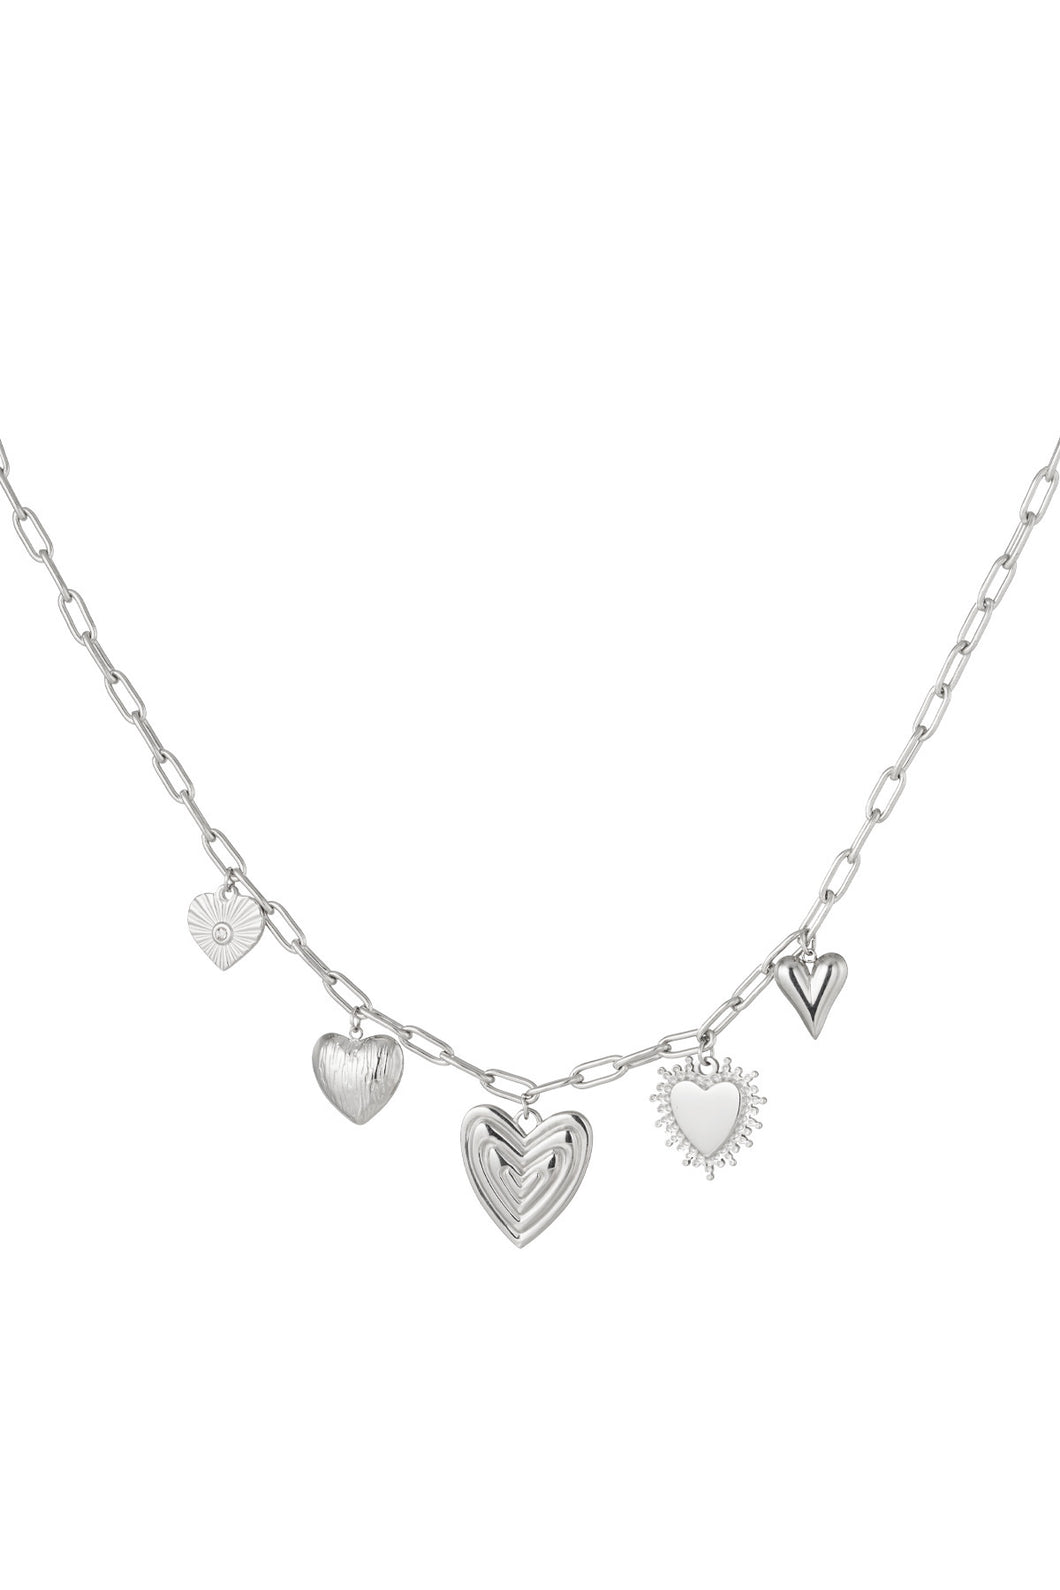 Heart beads necklace - silver